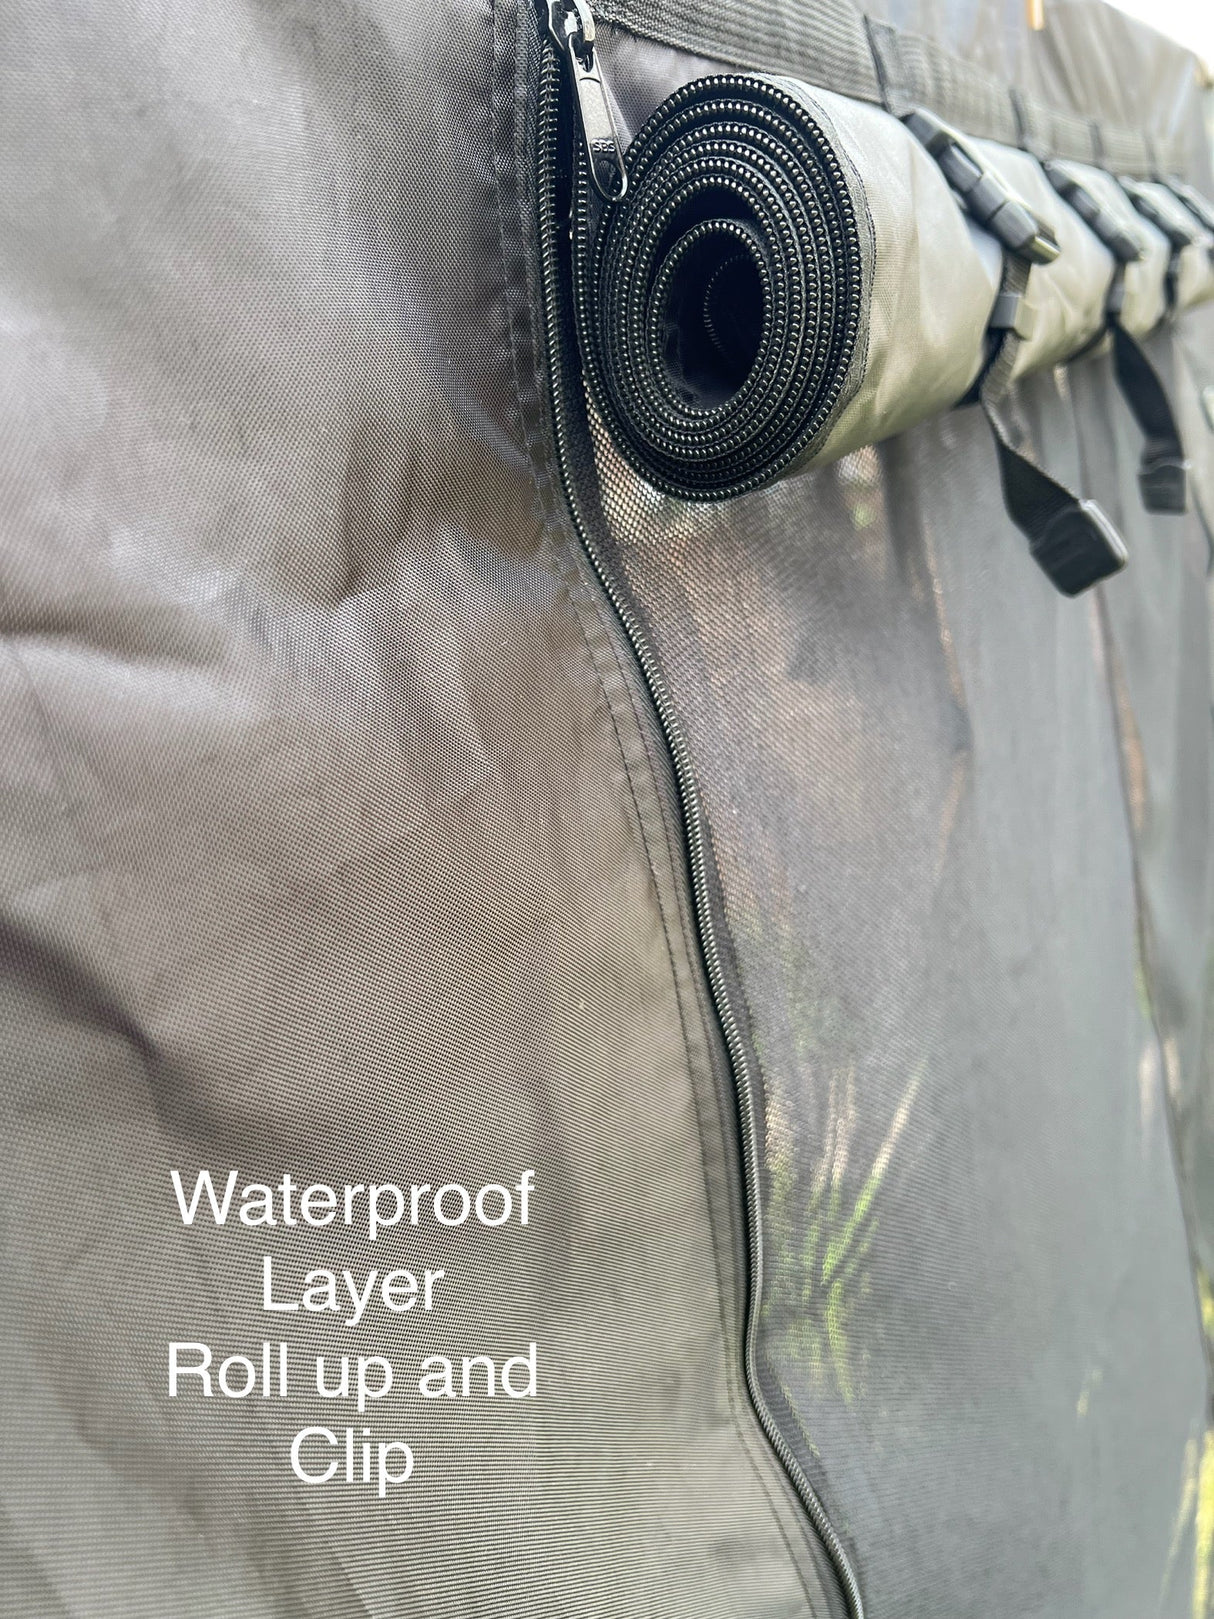 A GRADE / RETURN AS NEW VANdoûr Universal Medium & Large Size Campervan 4 in 1 Mosquito / Fly Net + Waterproof / Privacy Layer, to fit either side or rear.